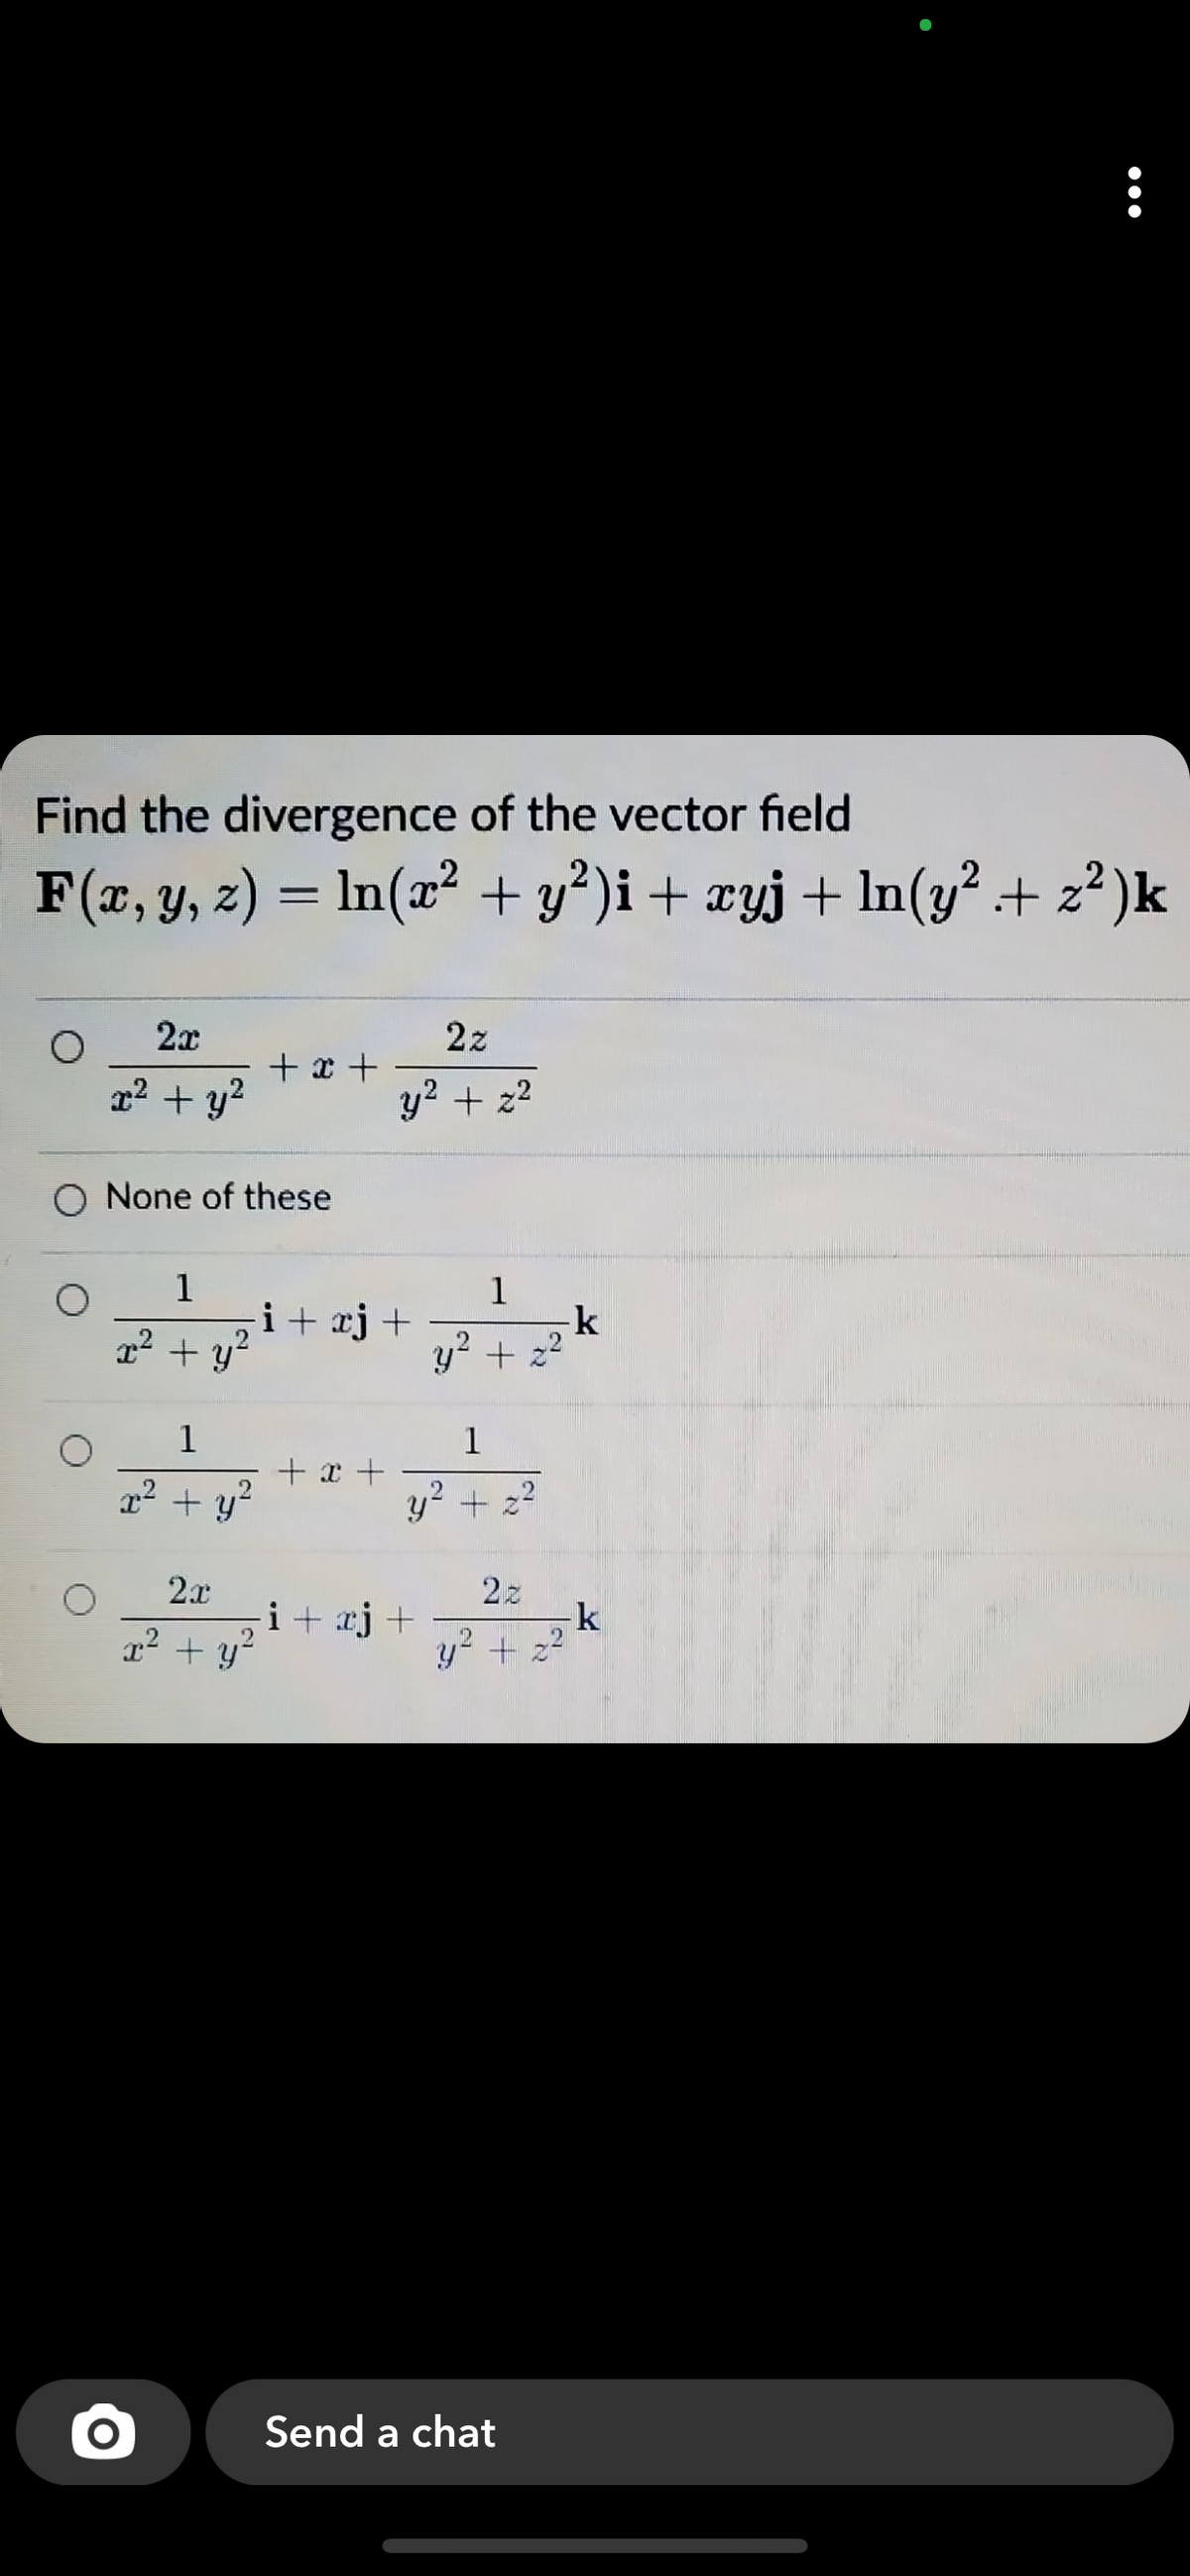 Find the divergence of the vector field
F(x, y, z) = ln(x² + y²)i+ ¤yj+ ln(y² + z² )k
2x
2z
+ x +
x2 + y2
y2 + z2
O None of these
1
1
k
y? + 22
i+ xj+
22 + y?
1
1
+ x +
r + y?
y? + 22
2x
i+ aj +
2z
x2 + y?
y? + z?
Send a chat
